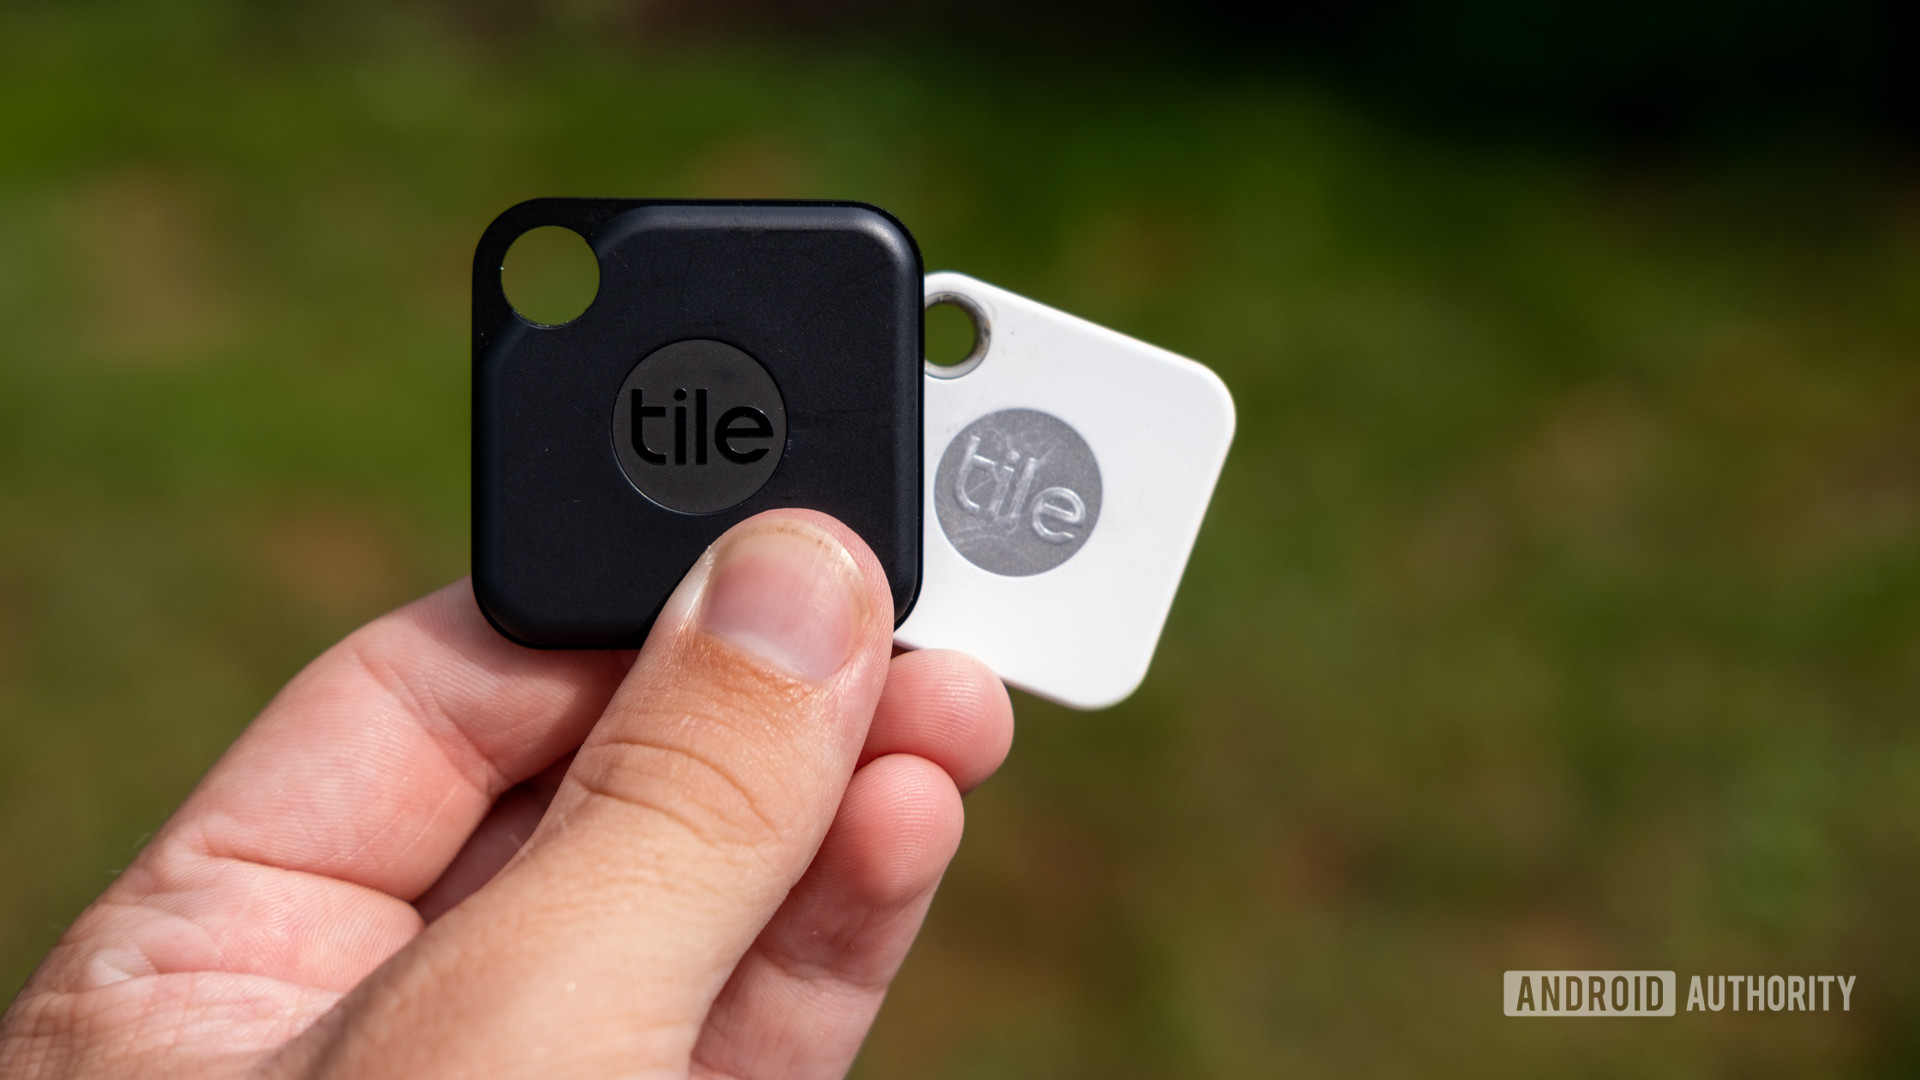 Image of a Tile Pro and Tile Mate between fingers